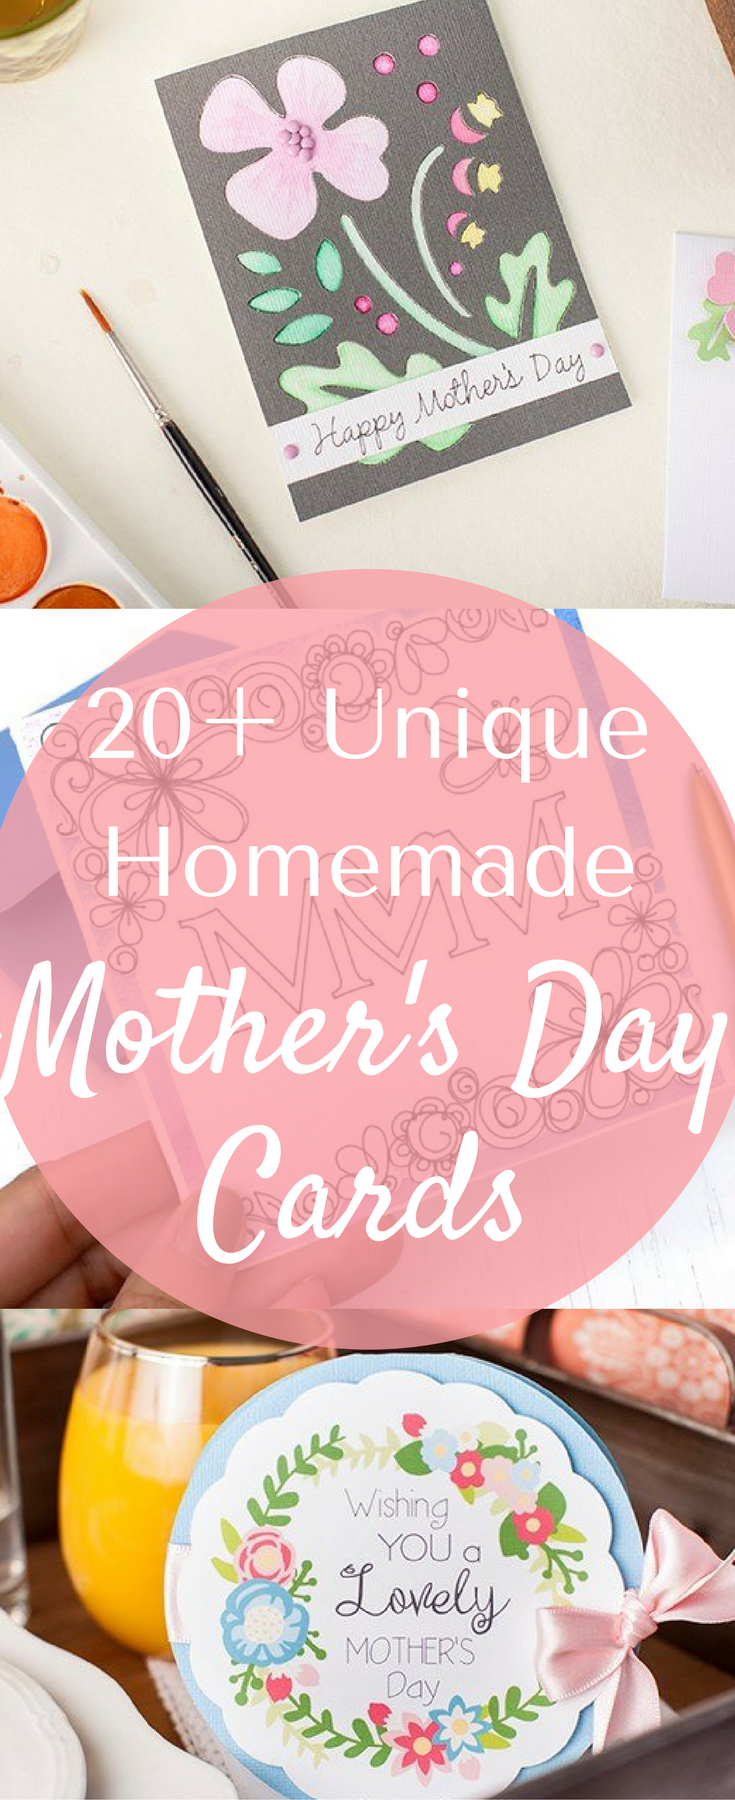 Homemade Mother's Day Cards / MOther's Day Ideas / DIY Mother's Day Cards / Cricut Mother's Day Cards / Cricut Paper Projects / Cricut Project Ideas / Paper Crafts / Paper Crafts / Homemade cards